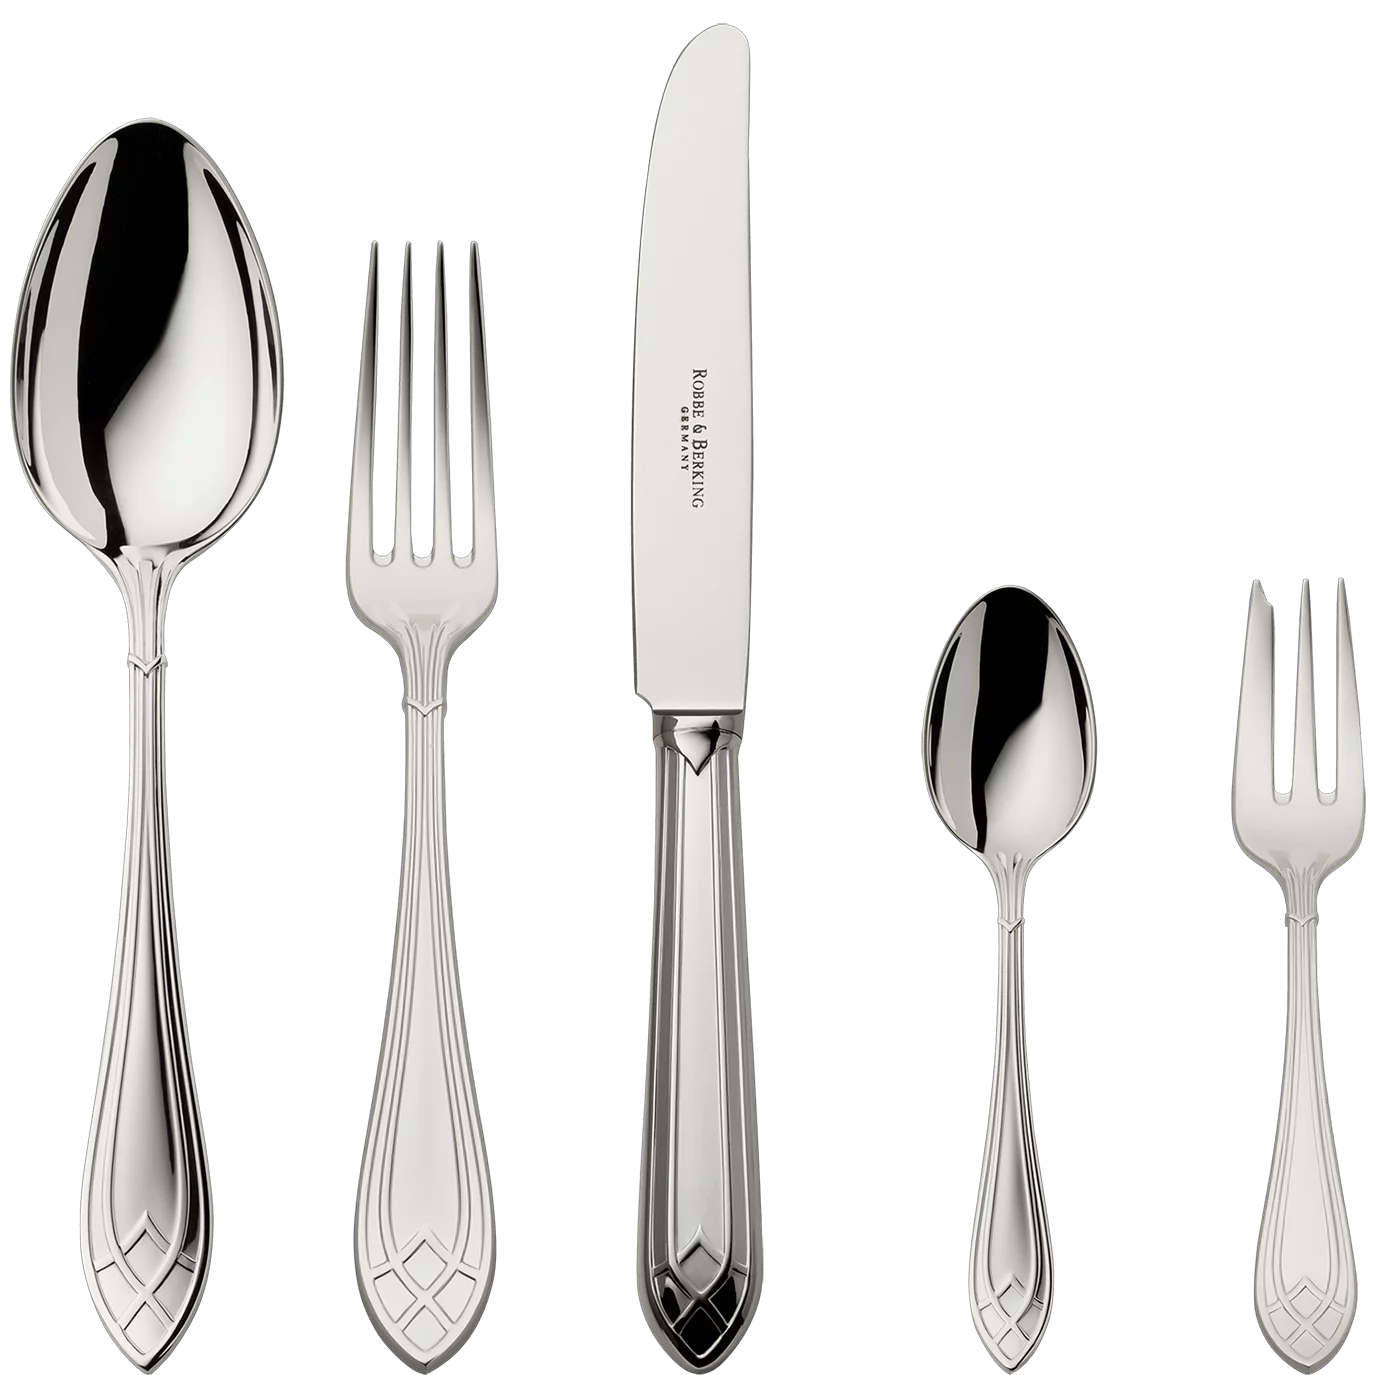 Arcade 5-piece place setting (150g massive silverplated)